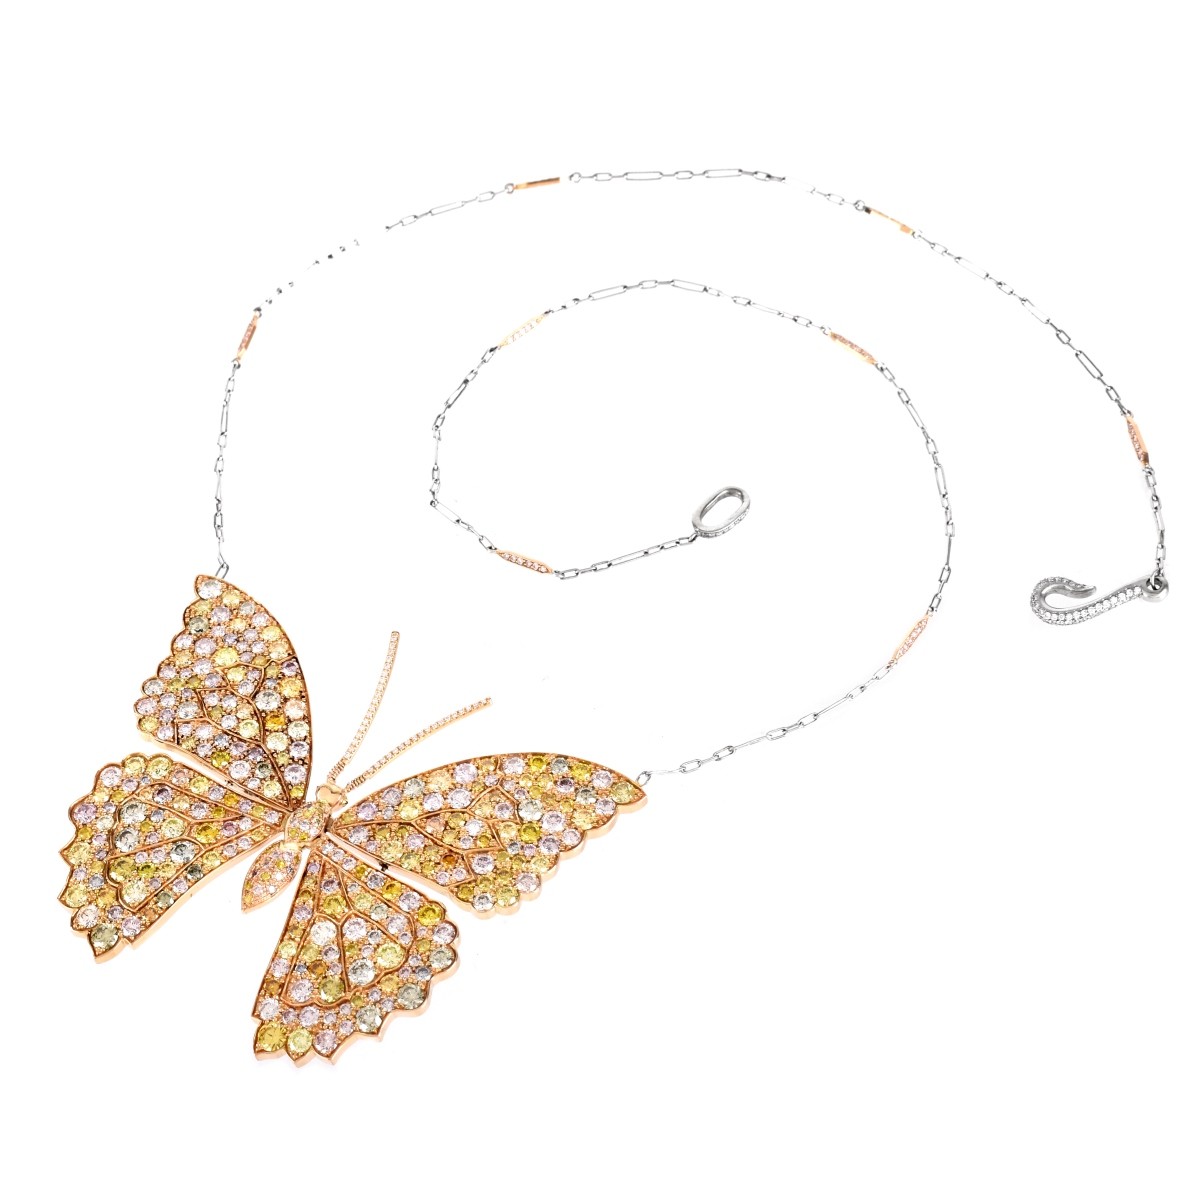 13.26ct TW Diamond and 18K Butterfly Pendant